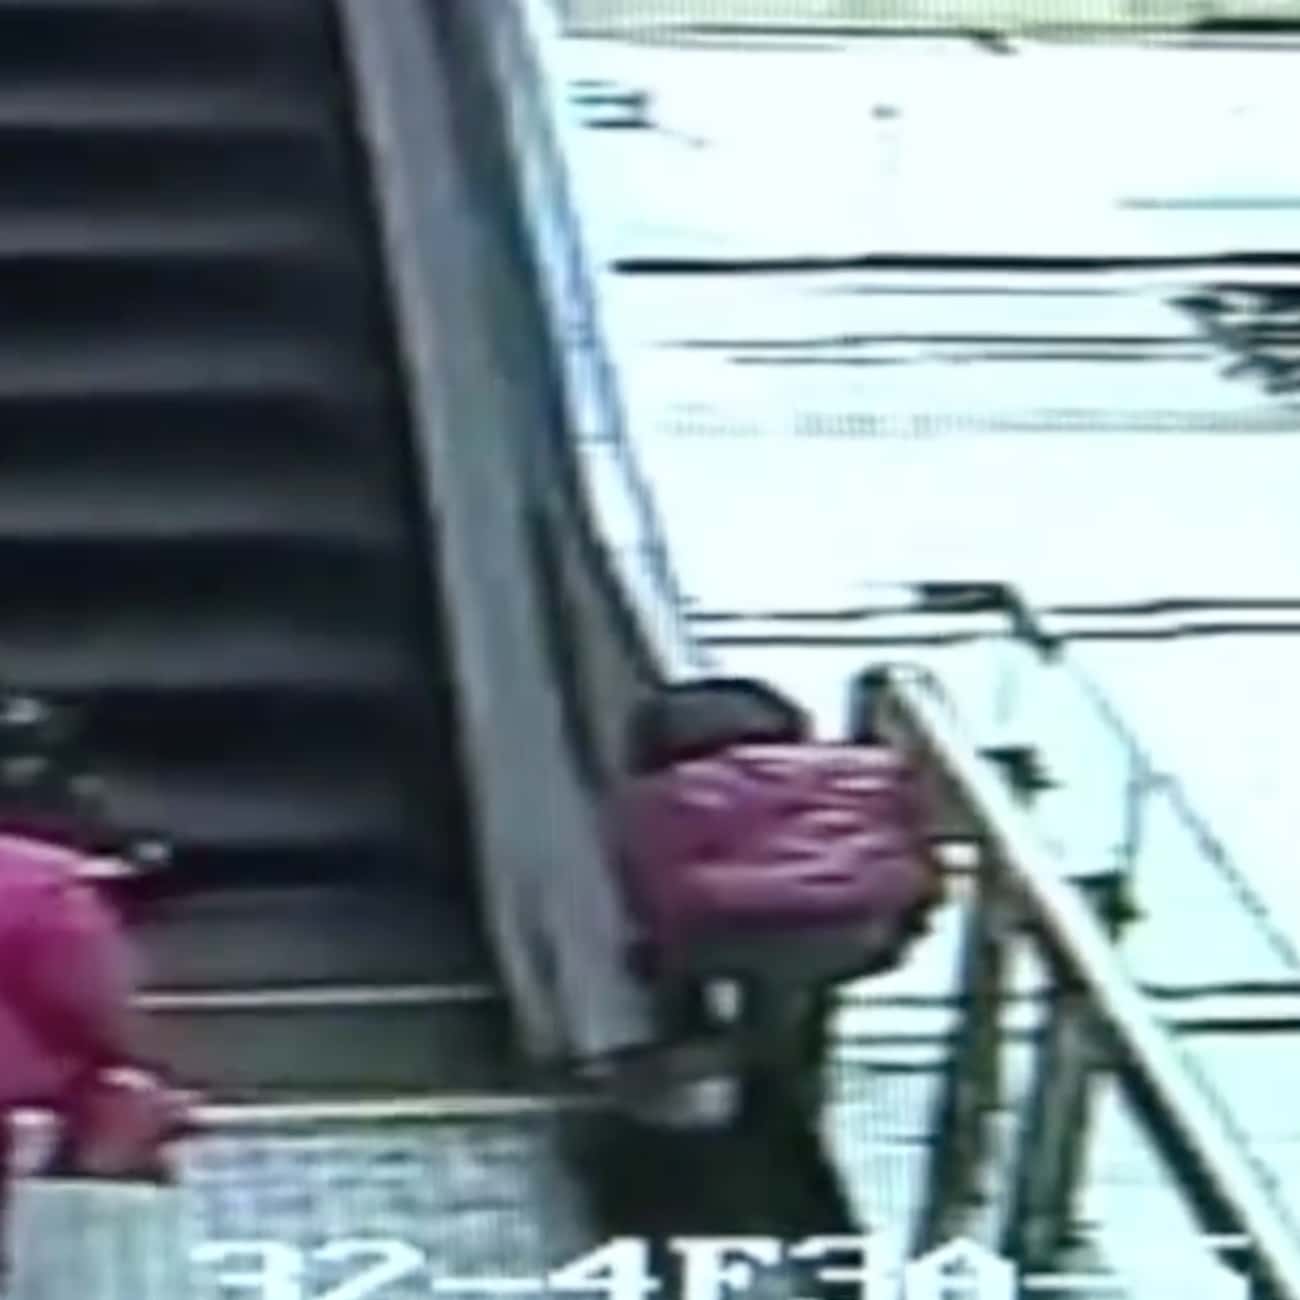 Girl Plummets to Death While Playing on Escalator Handrail